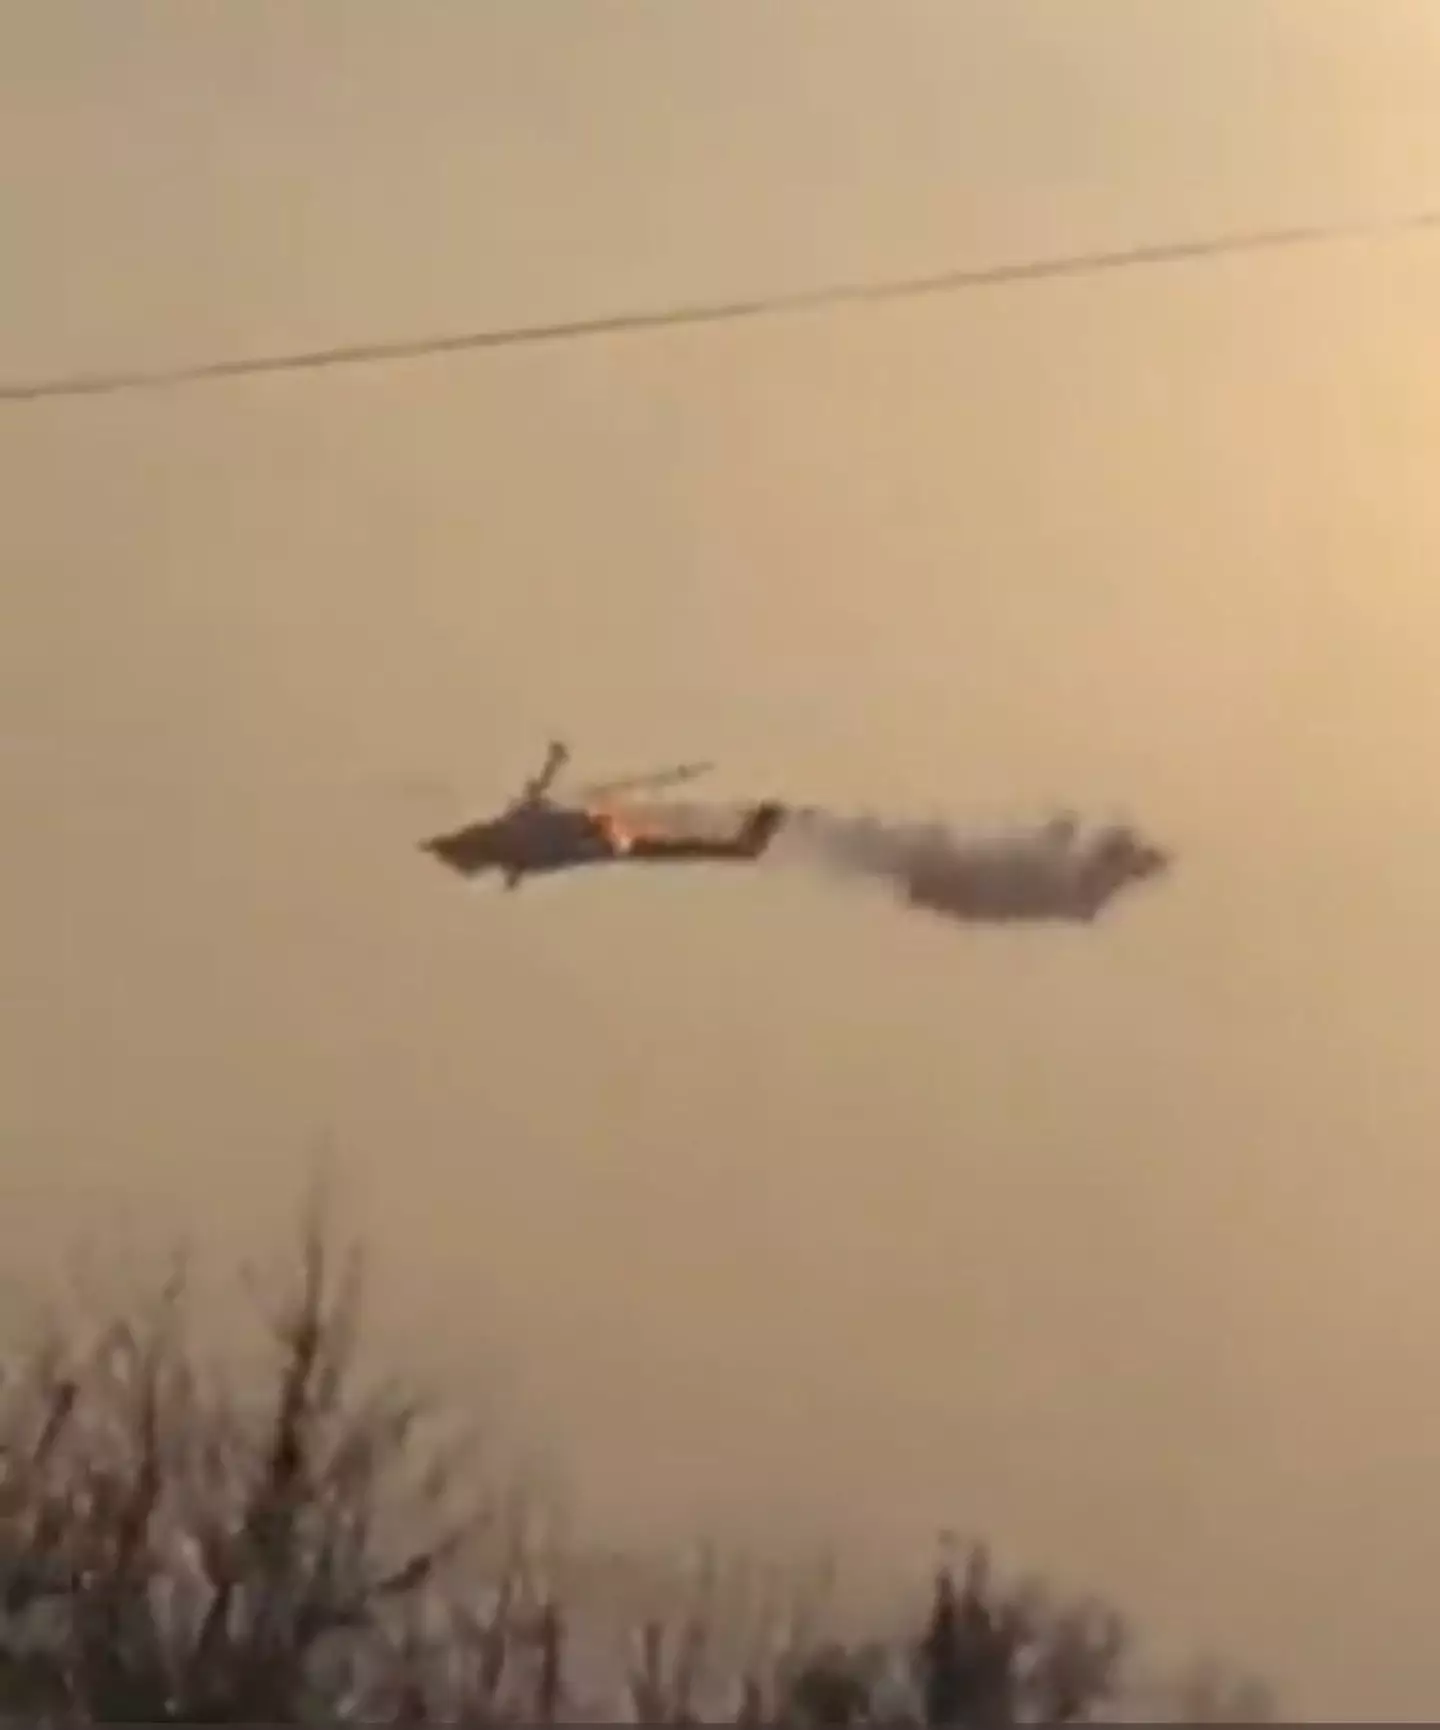 The helicopter hit by the Starstreak missile.